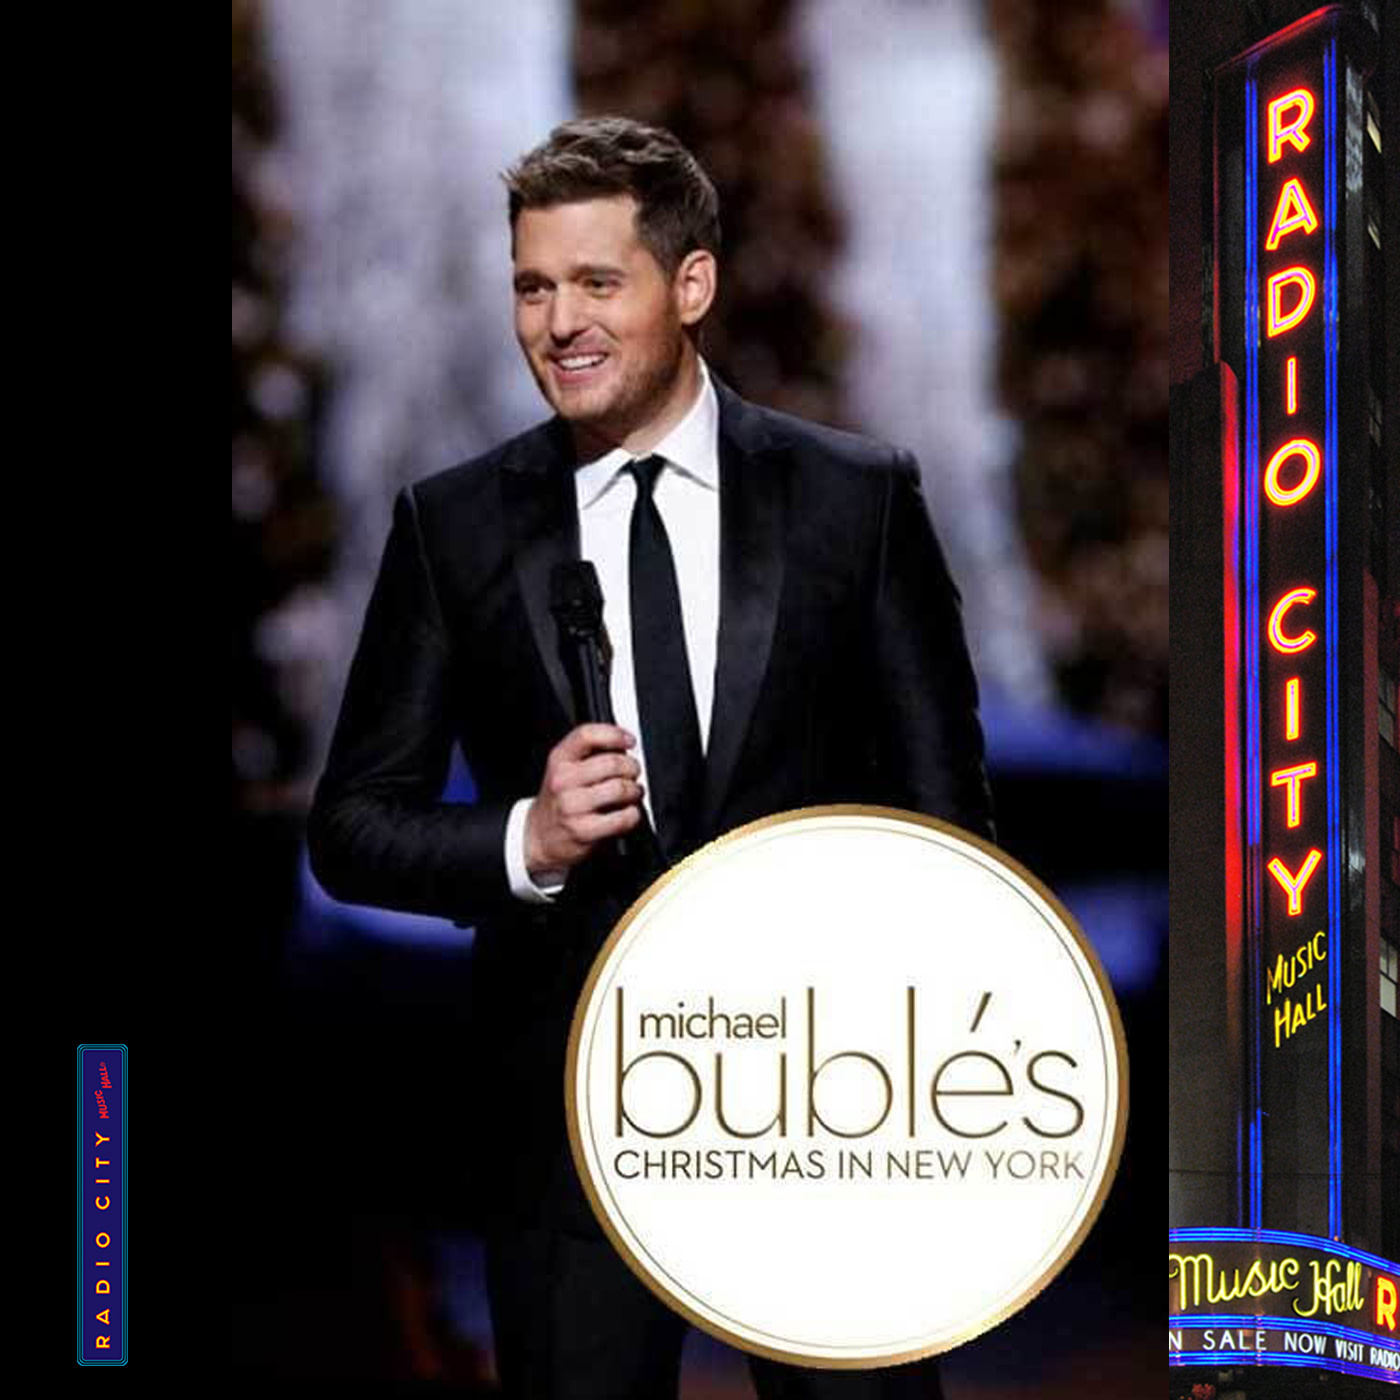 Michael Bublé Christmas in New York Full Show Live Xmas Concert